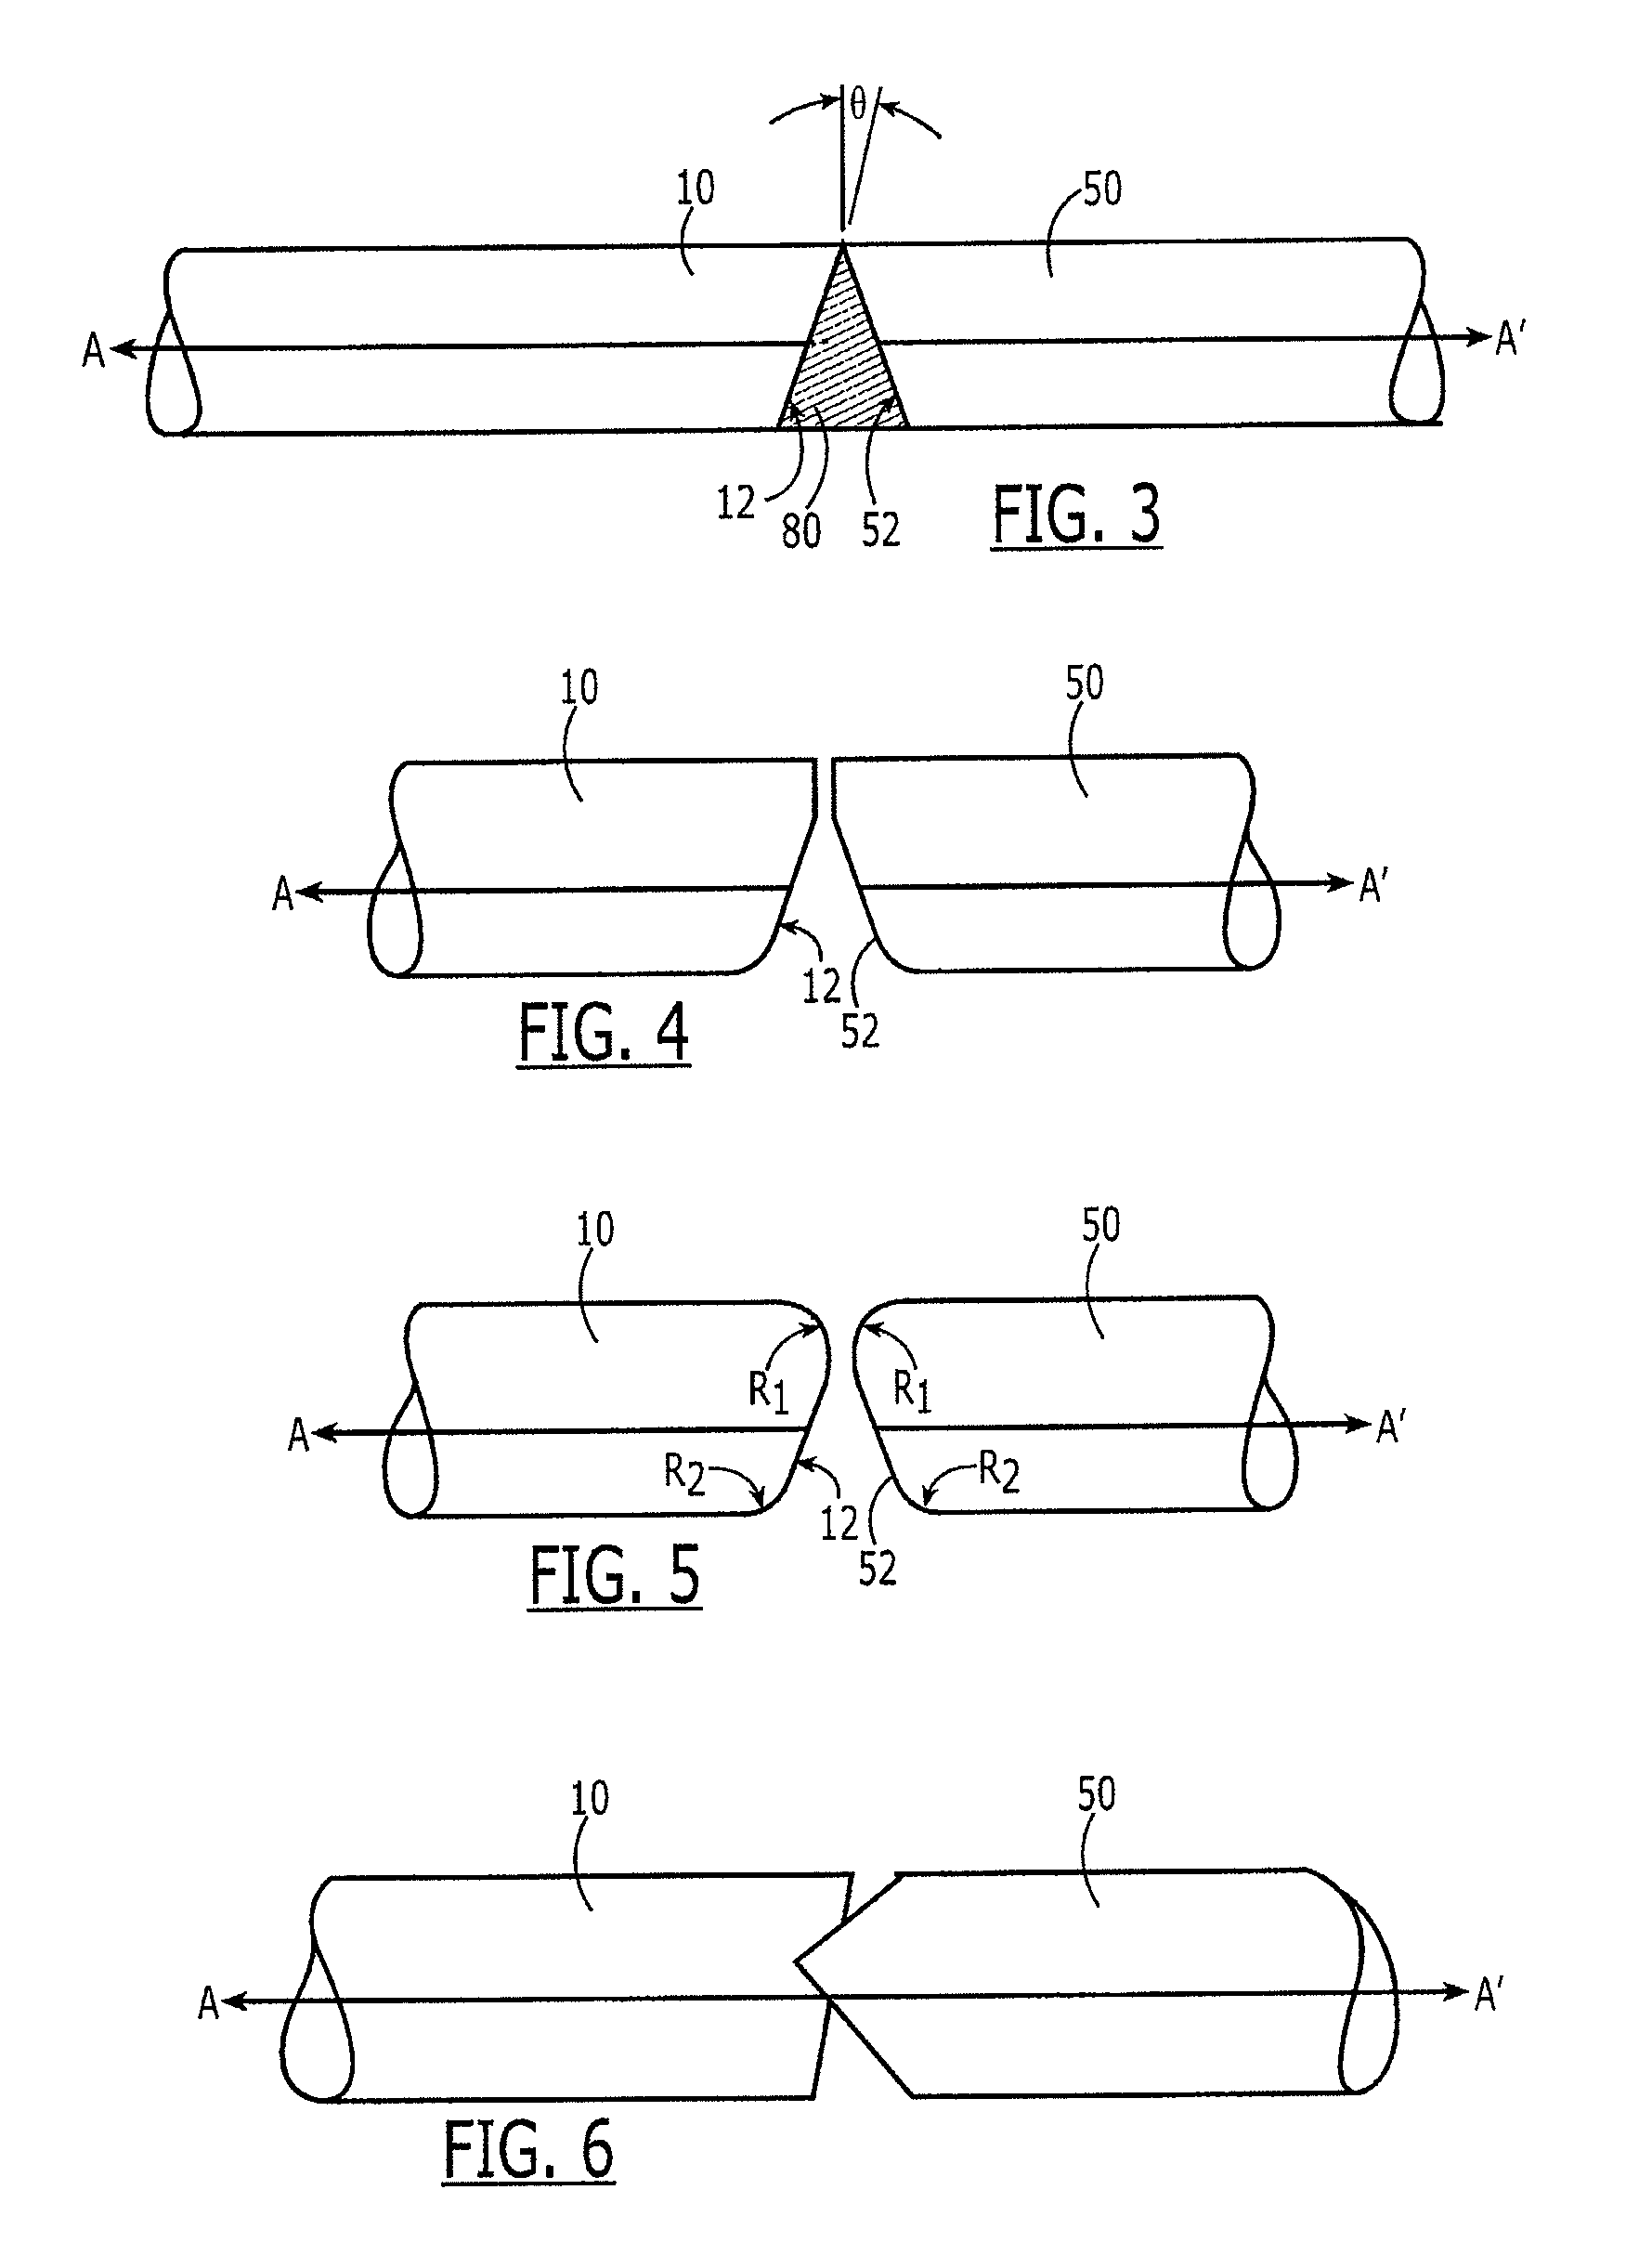 Mating of optical fibers having angled end faces